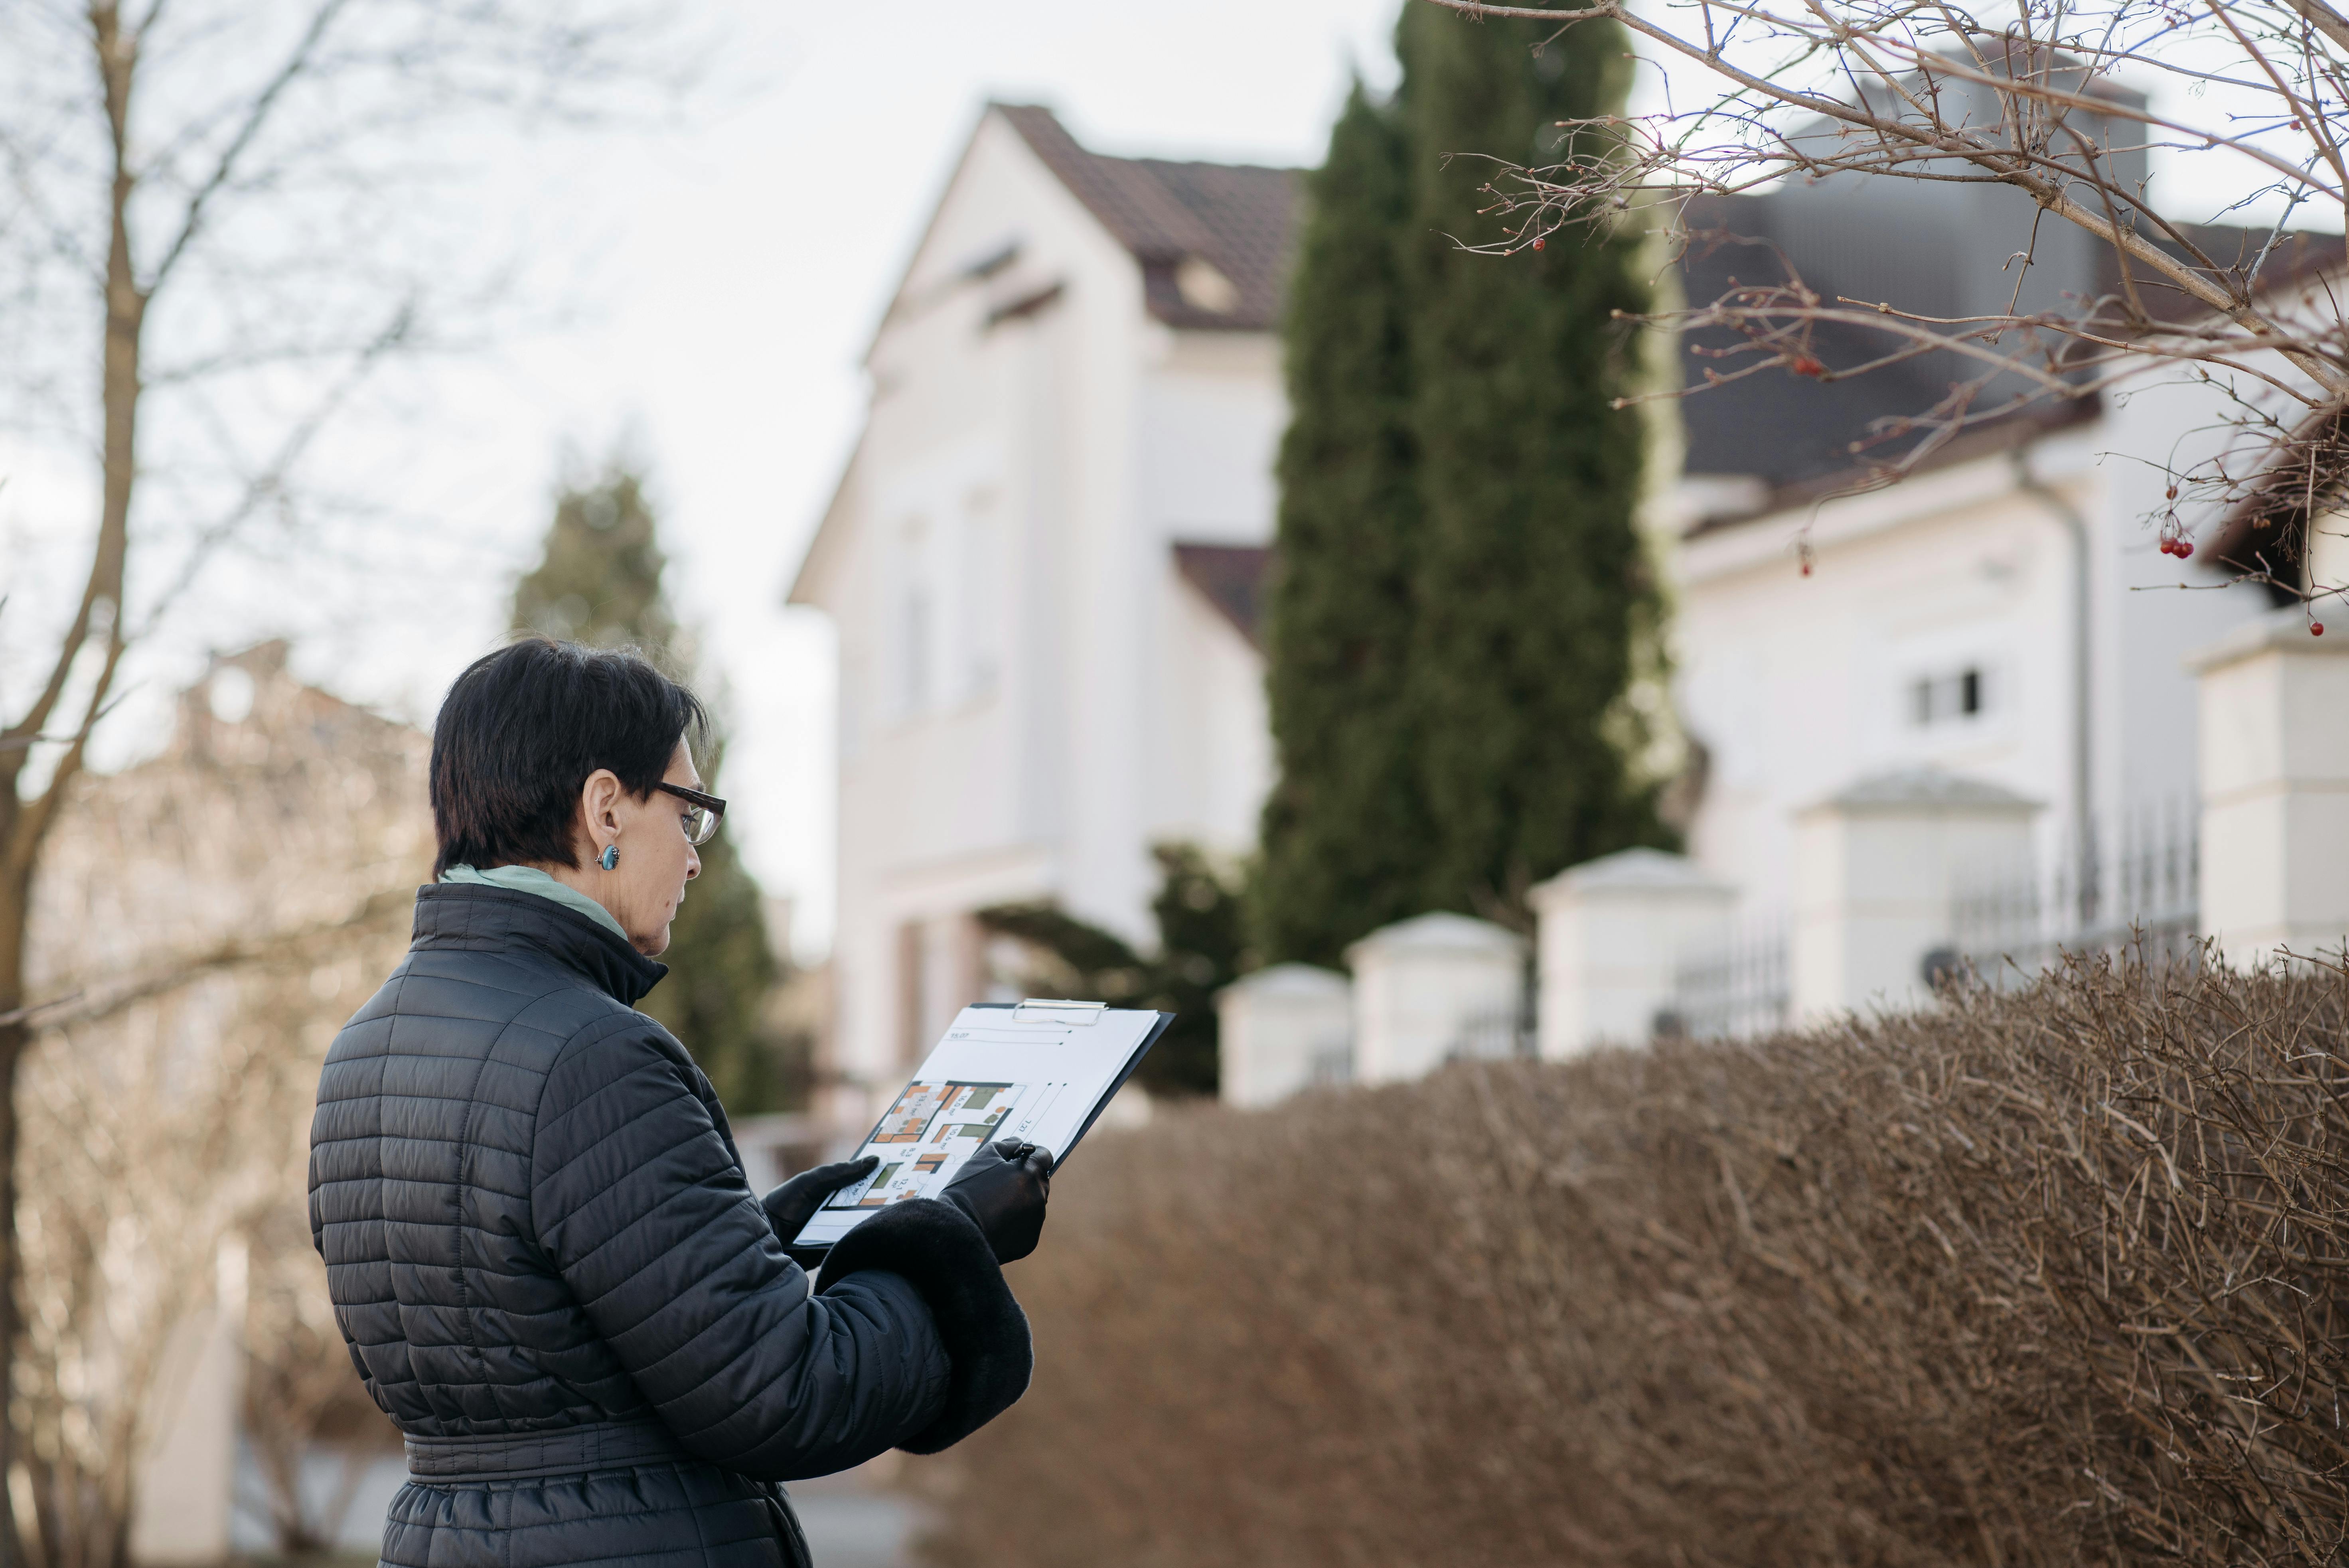  A female real estate agent in a black jacket is looking at a house plan outside a home